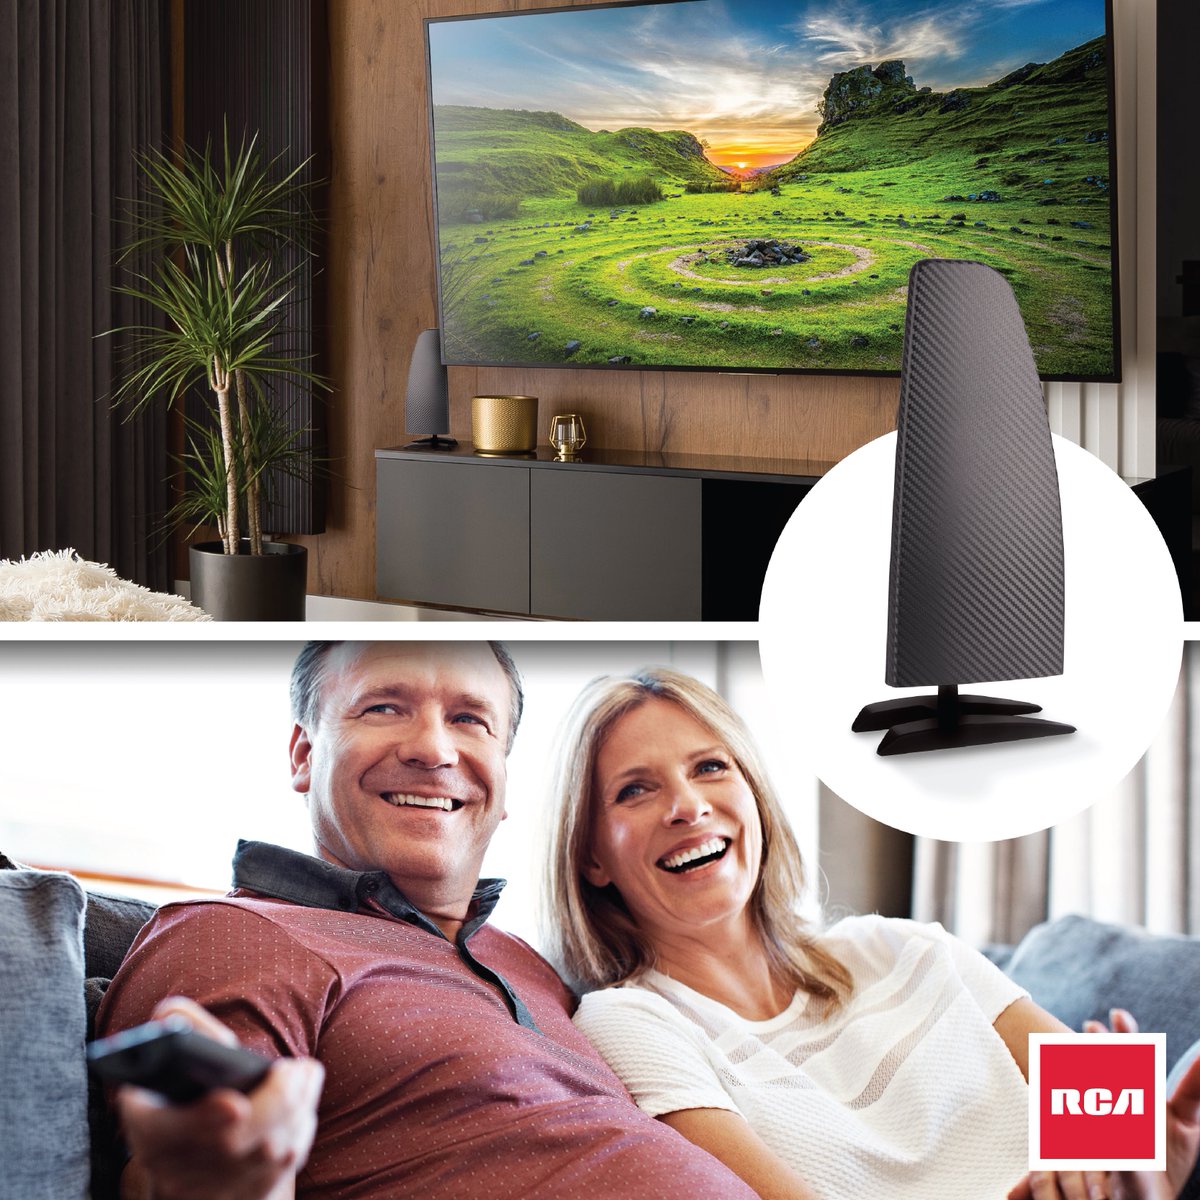 Switch to FREE TV today with the RCA ANTD2E TV Antenna! Crystal-clear 8K, 4K HD, local news, weather and sports without the cost of cable or satellite. SmartBoost technology ensures the best picture and sound, and setting up the antenna is a breeze with our Signal Finder App.